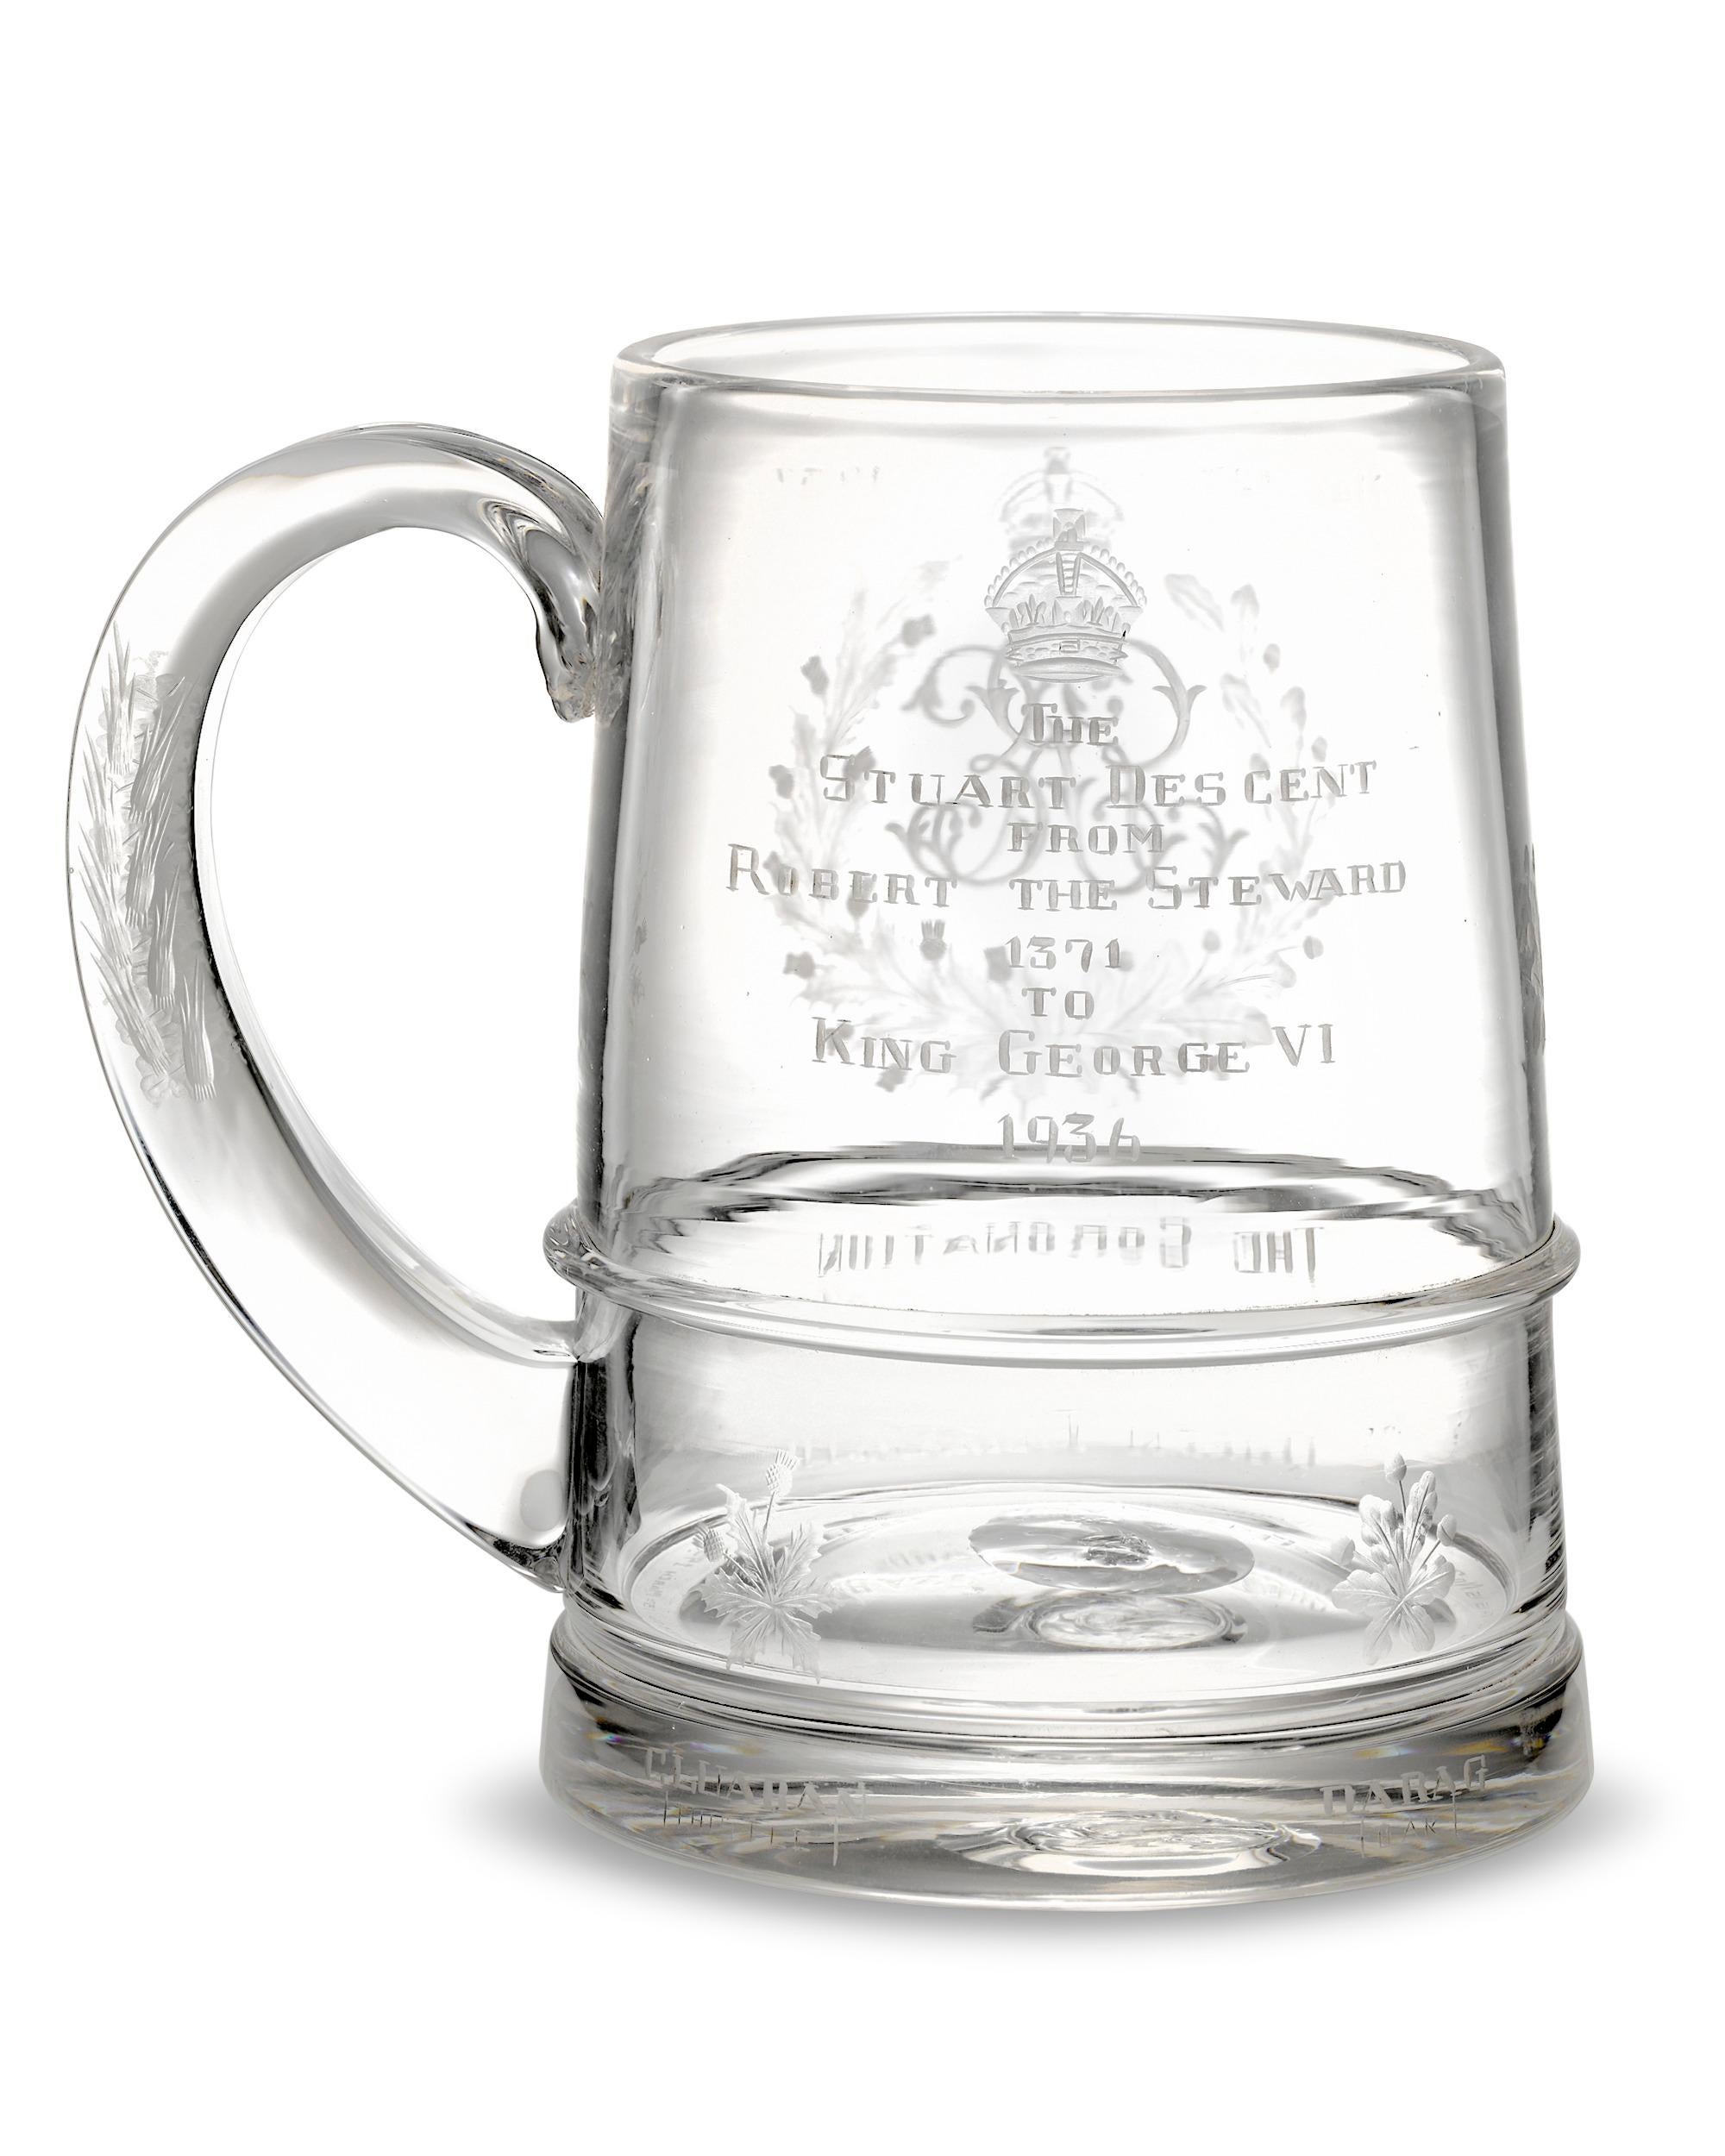 Intricate engravings symbolic of the English monarchy decorate this limited edition glass tankard commemorating the 1937 coronation of King George VI and Queen Elizabeth. On one side, the king's crowned monogram is framed by oak and thistle foliage